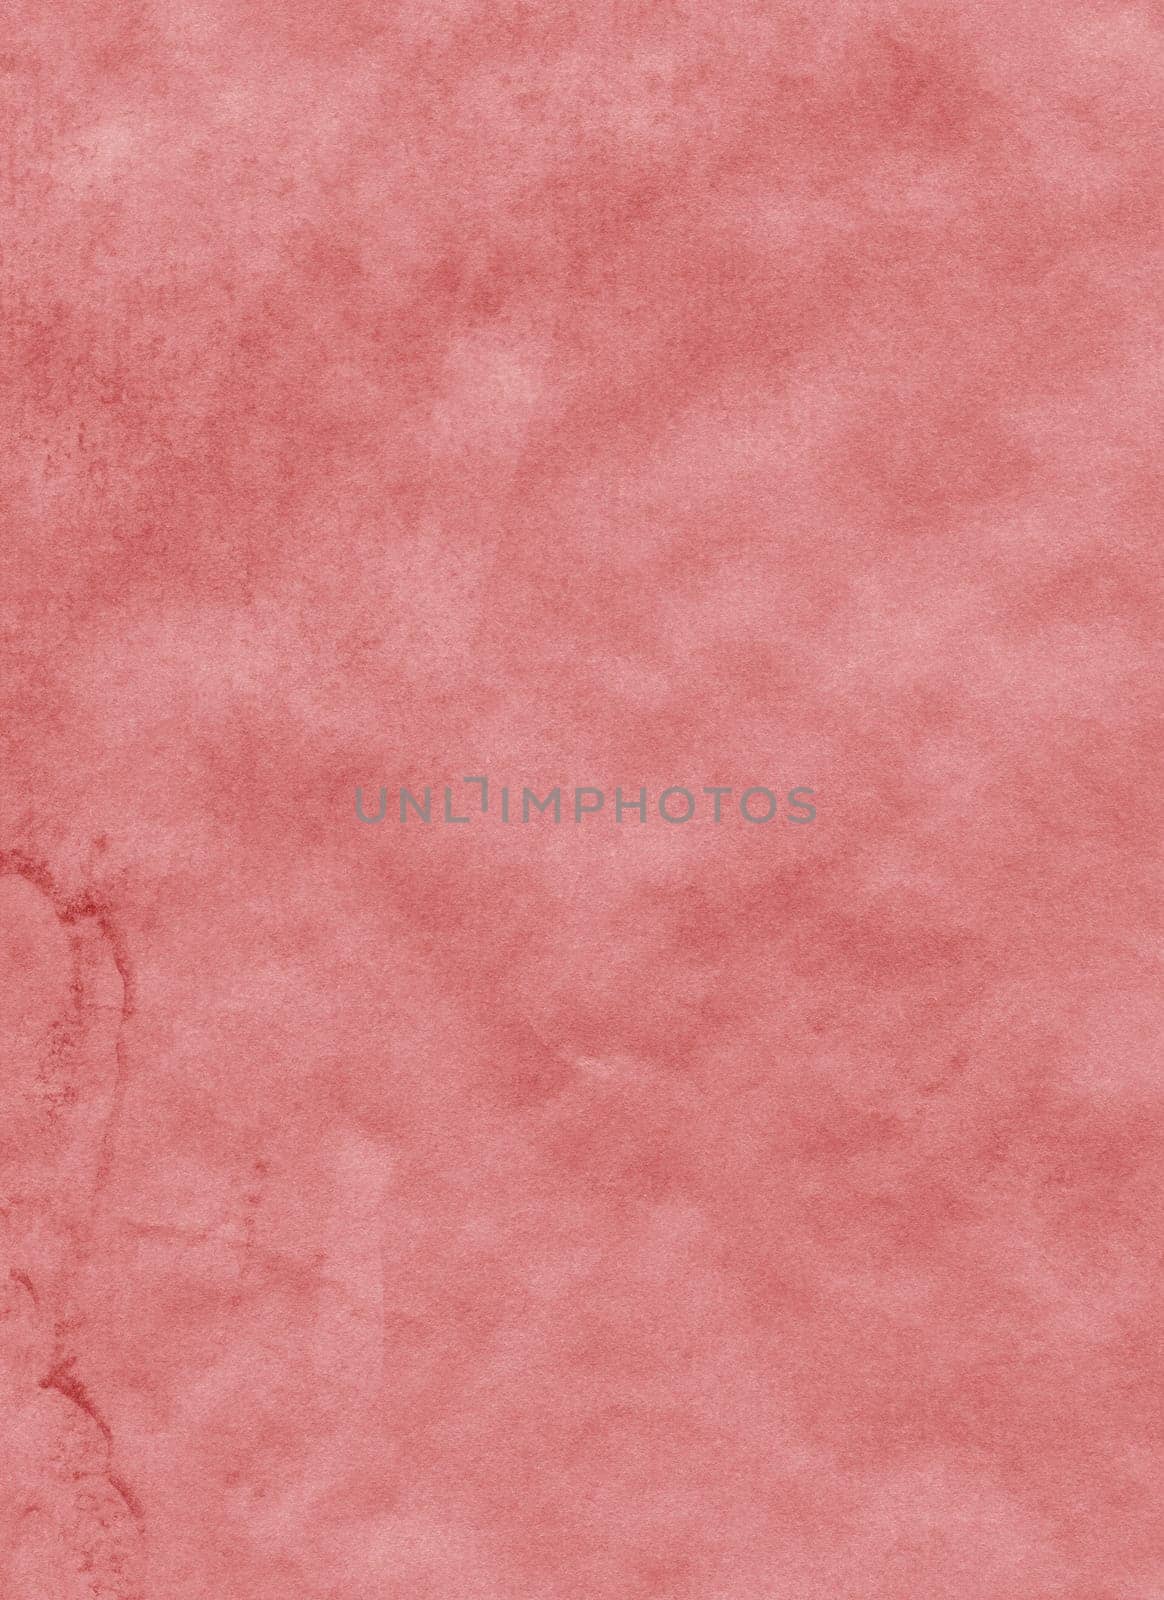 Abstract Red Watercolor Background. Red Watercolor Texture. Abstract Watercolor Hand Painted Background. by Rina_Dozornaya